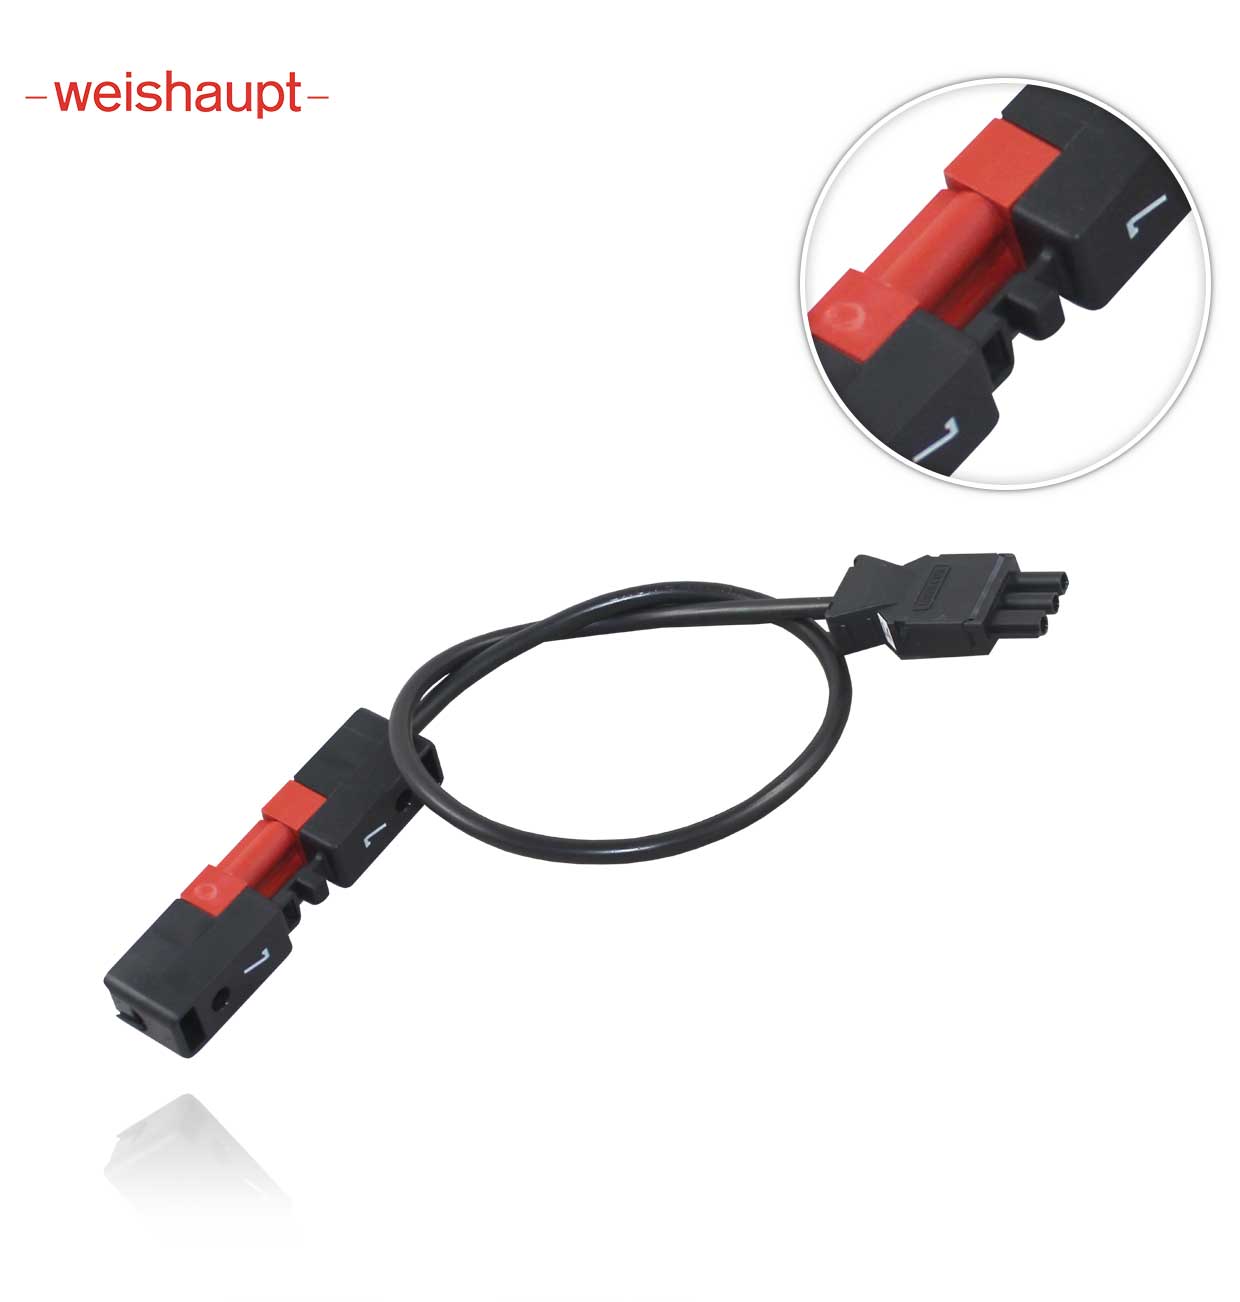 WEISHAUPT No. 14 PLUG-IN UNLOCKING CABLE